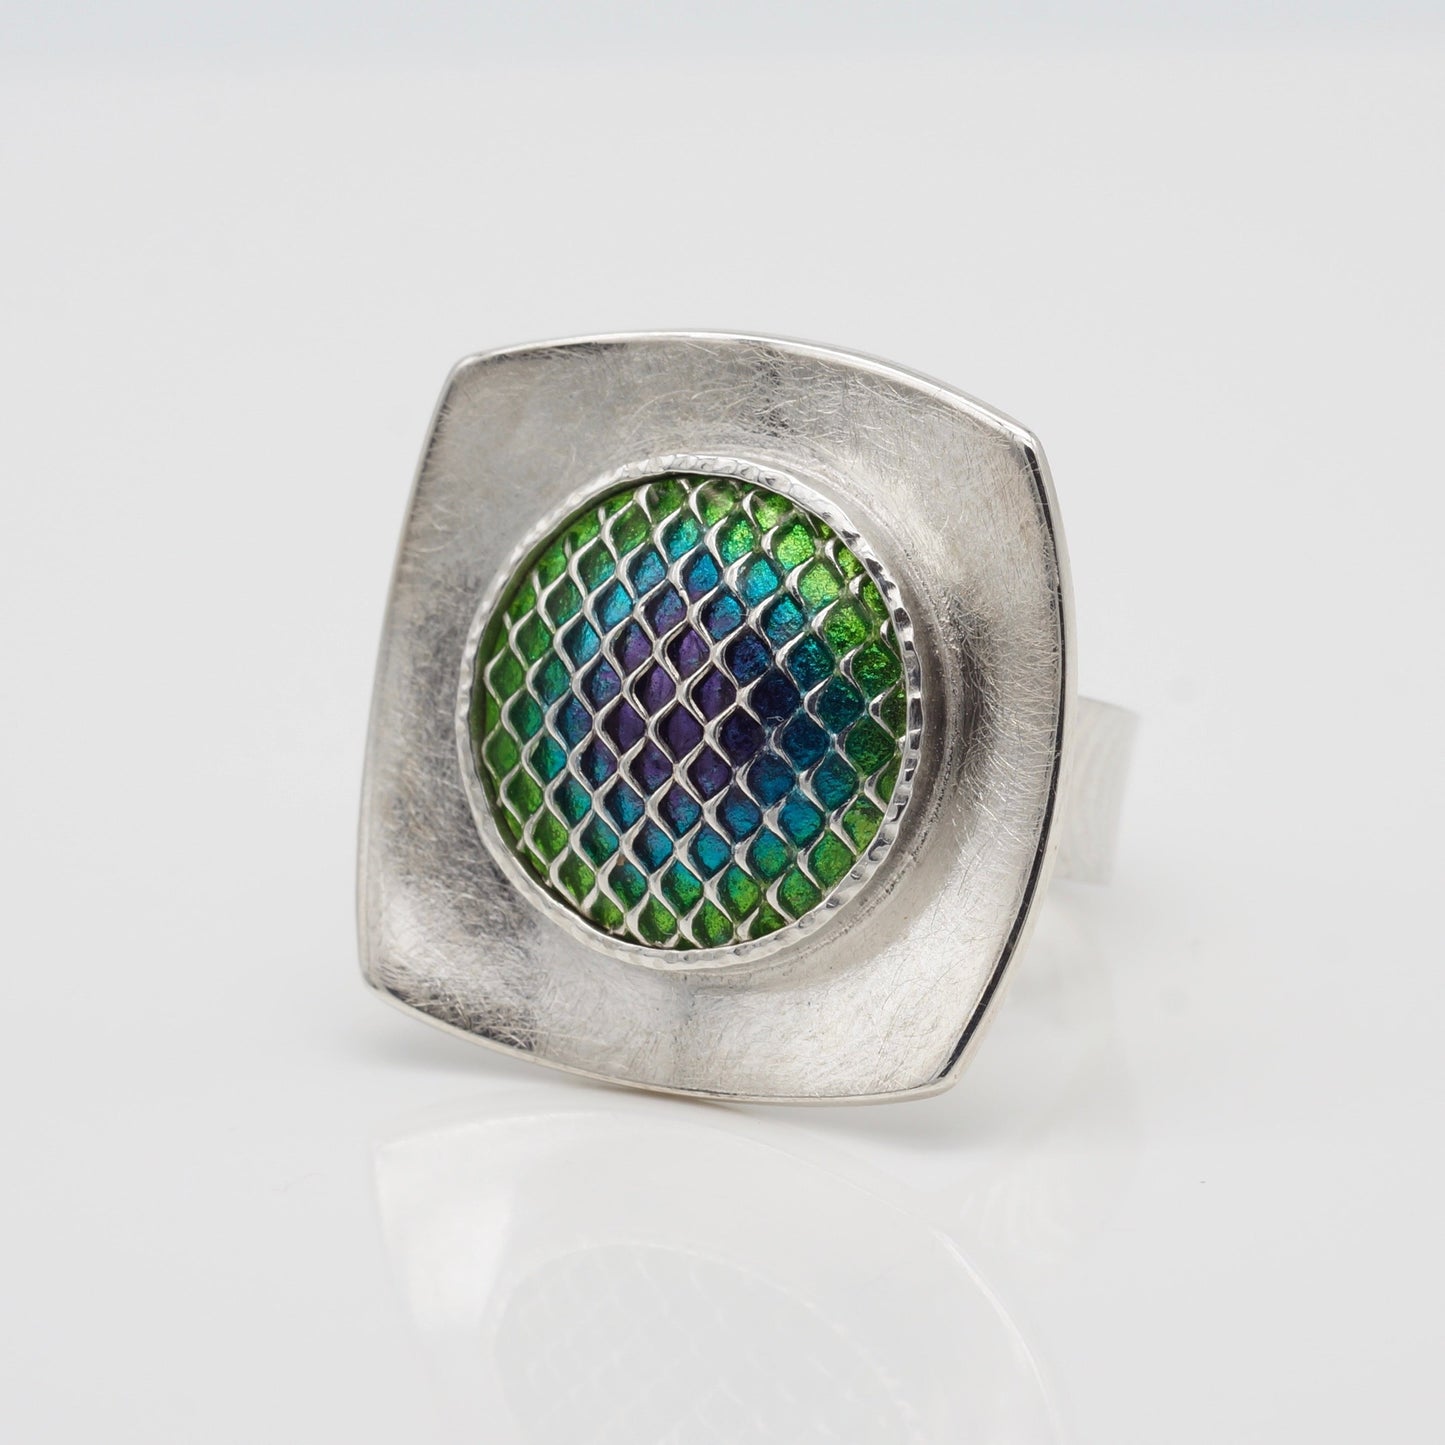 mid century style vitreous enamel sterling silver ring with ombre purple blue and green